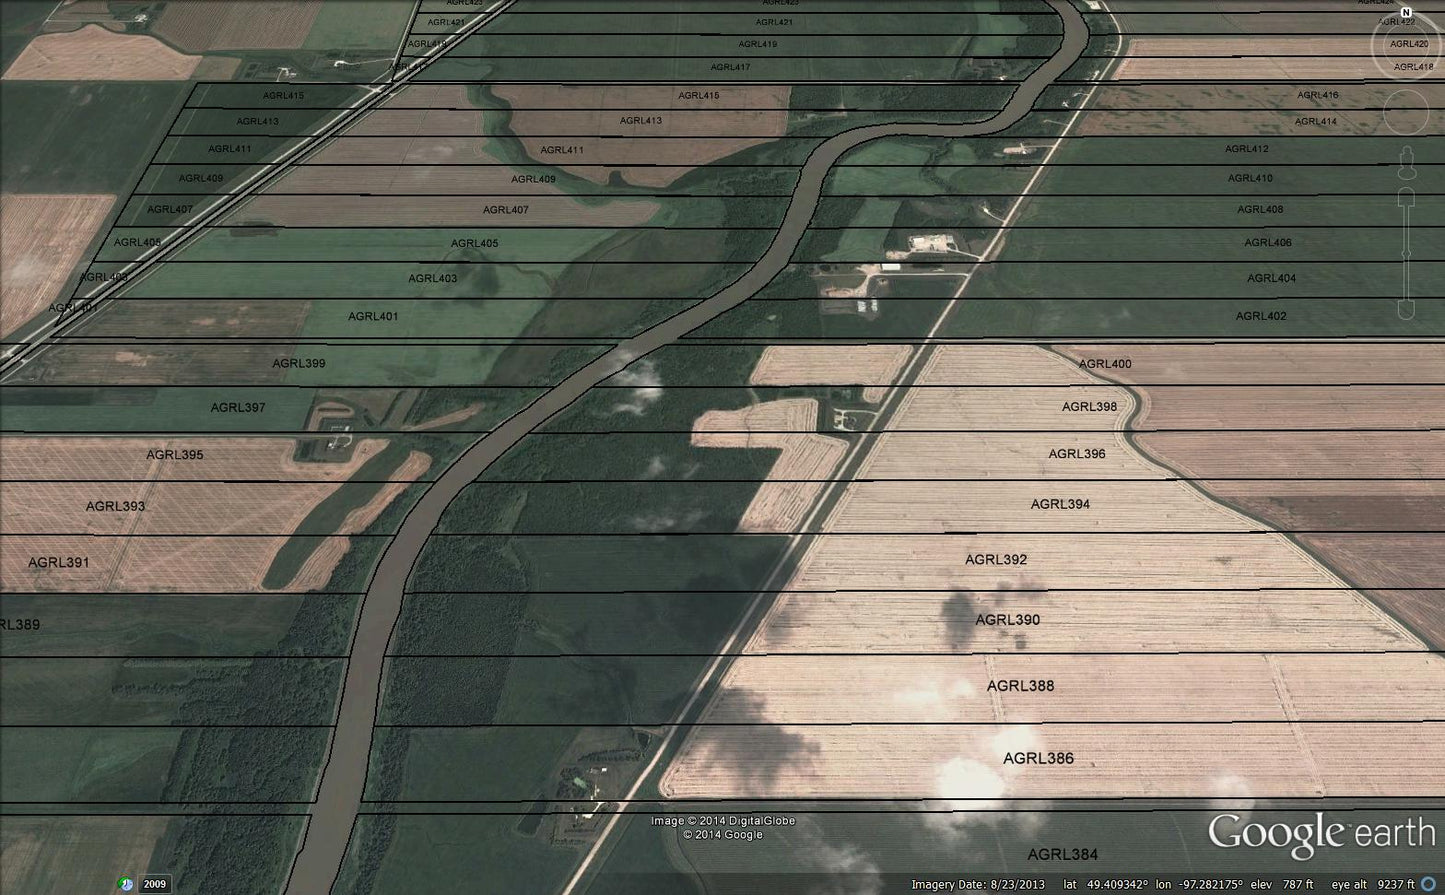 Google Earth Municipality Qtr Section Overlays MANITOBA ONLY